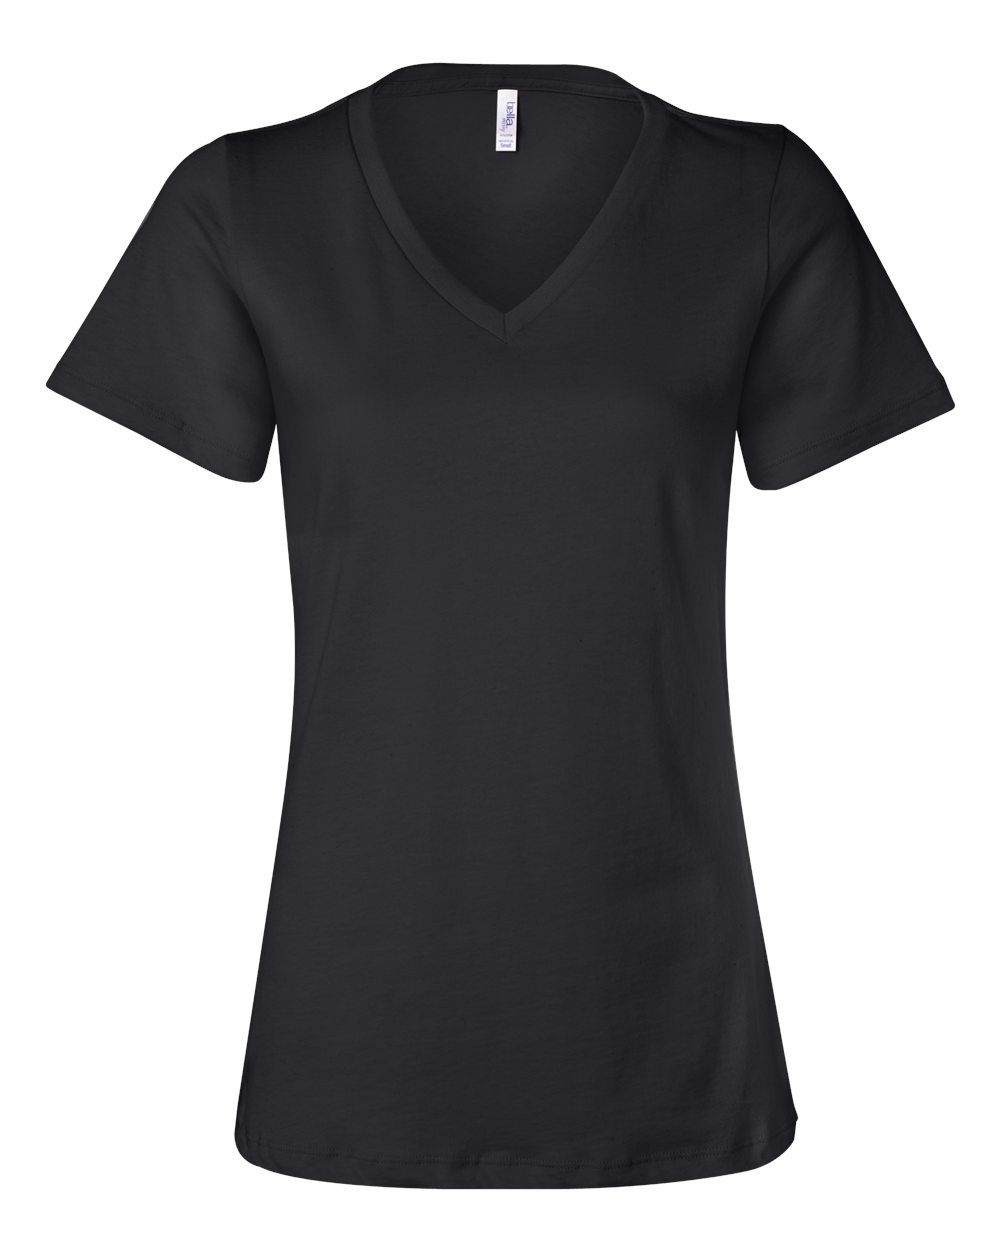 bella+canvas womens relaxed v-neck tee black